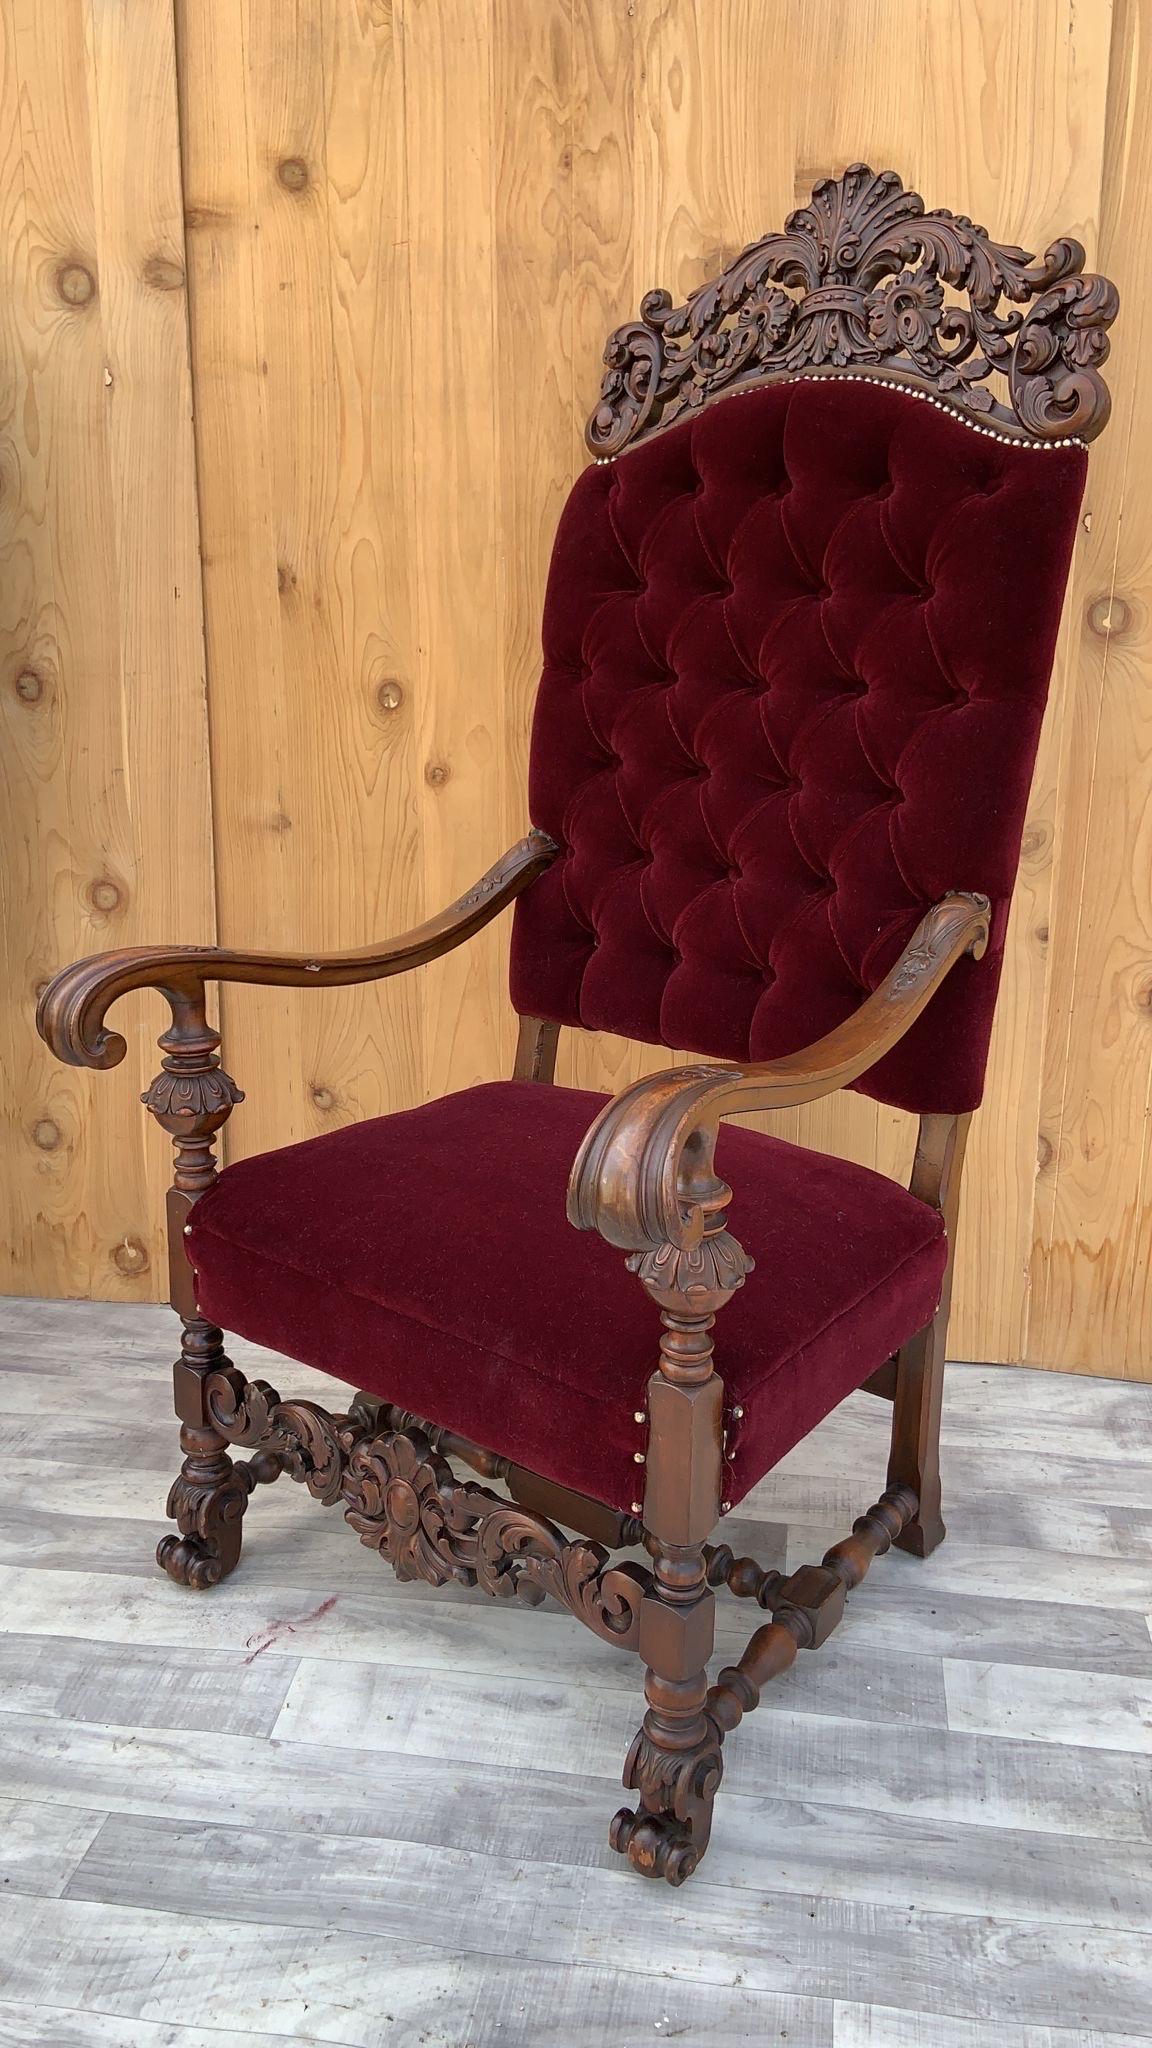 Antique French Regency Style Caved Walnut Throne Chairs Newly Upholstered, Pair For Sale 2